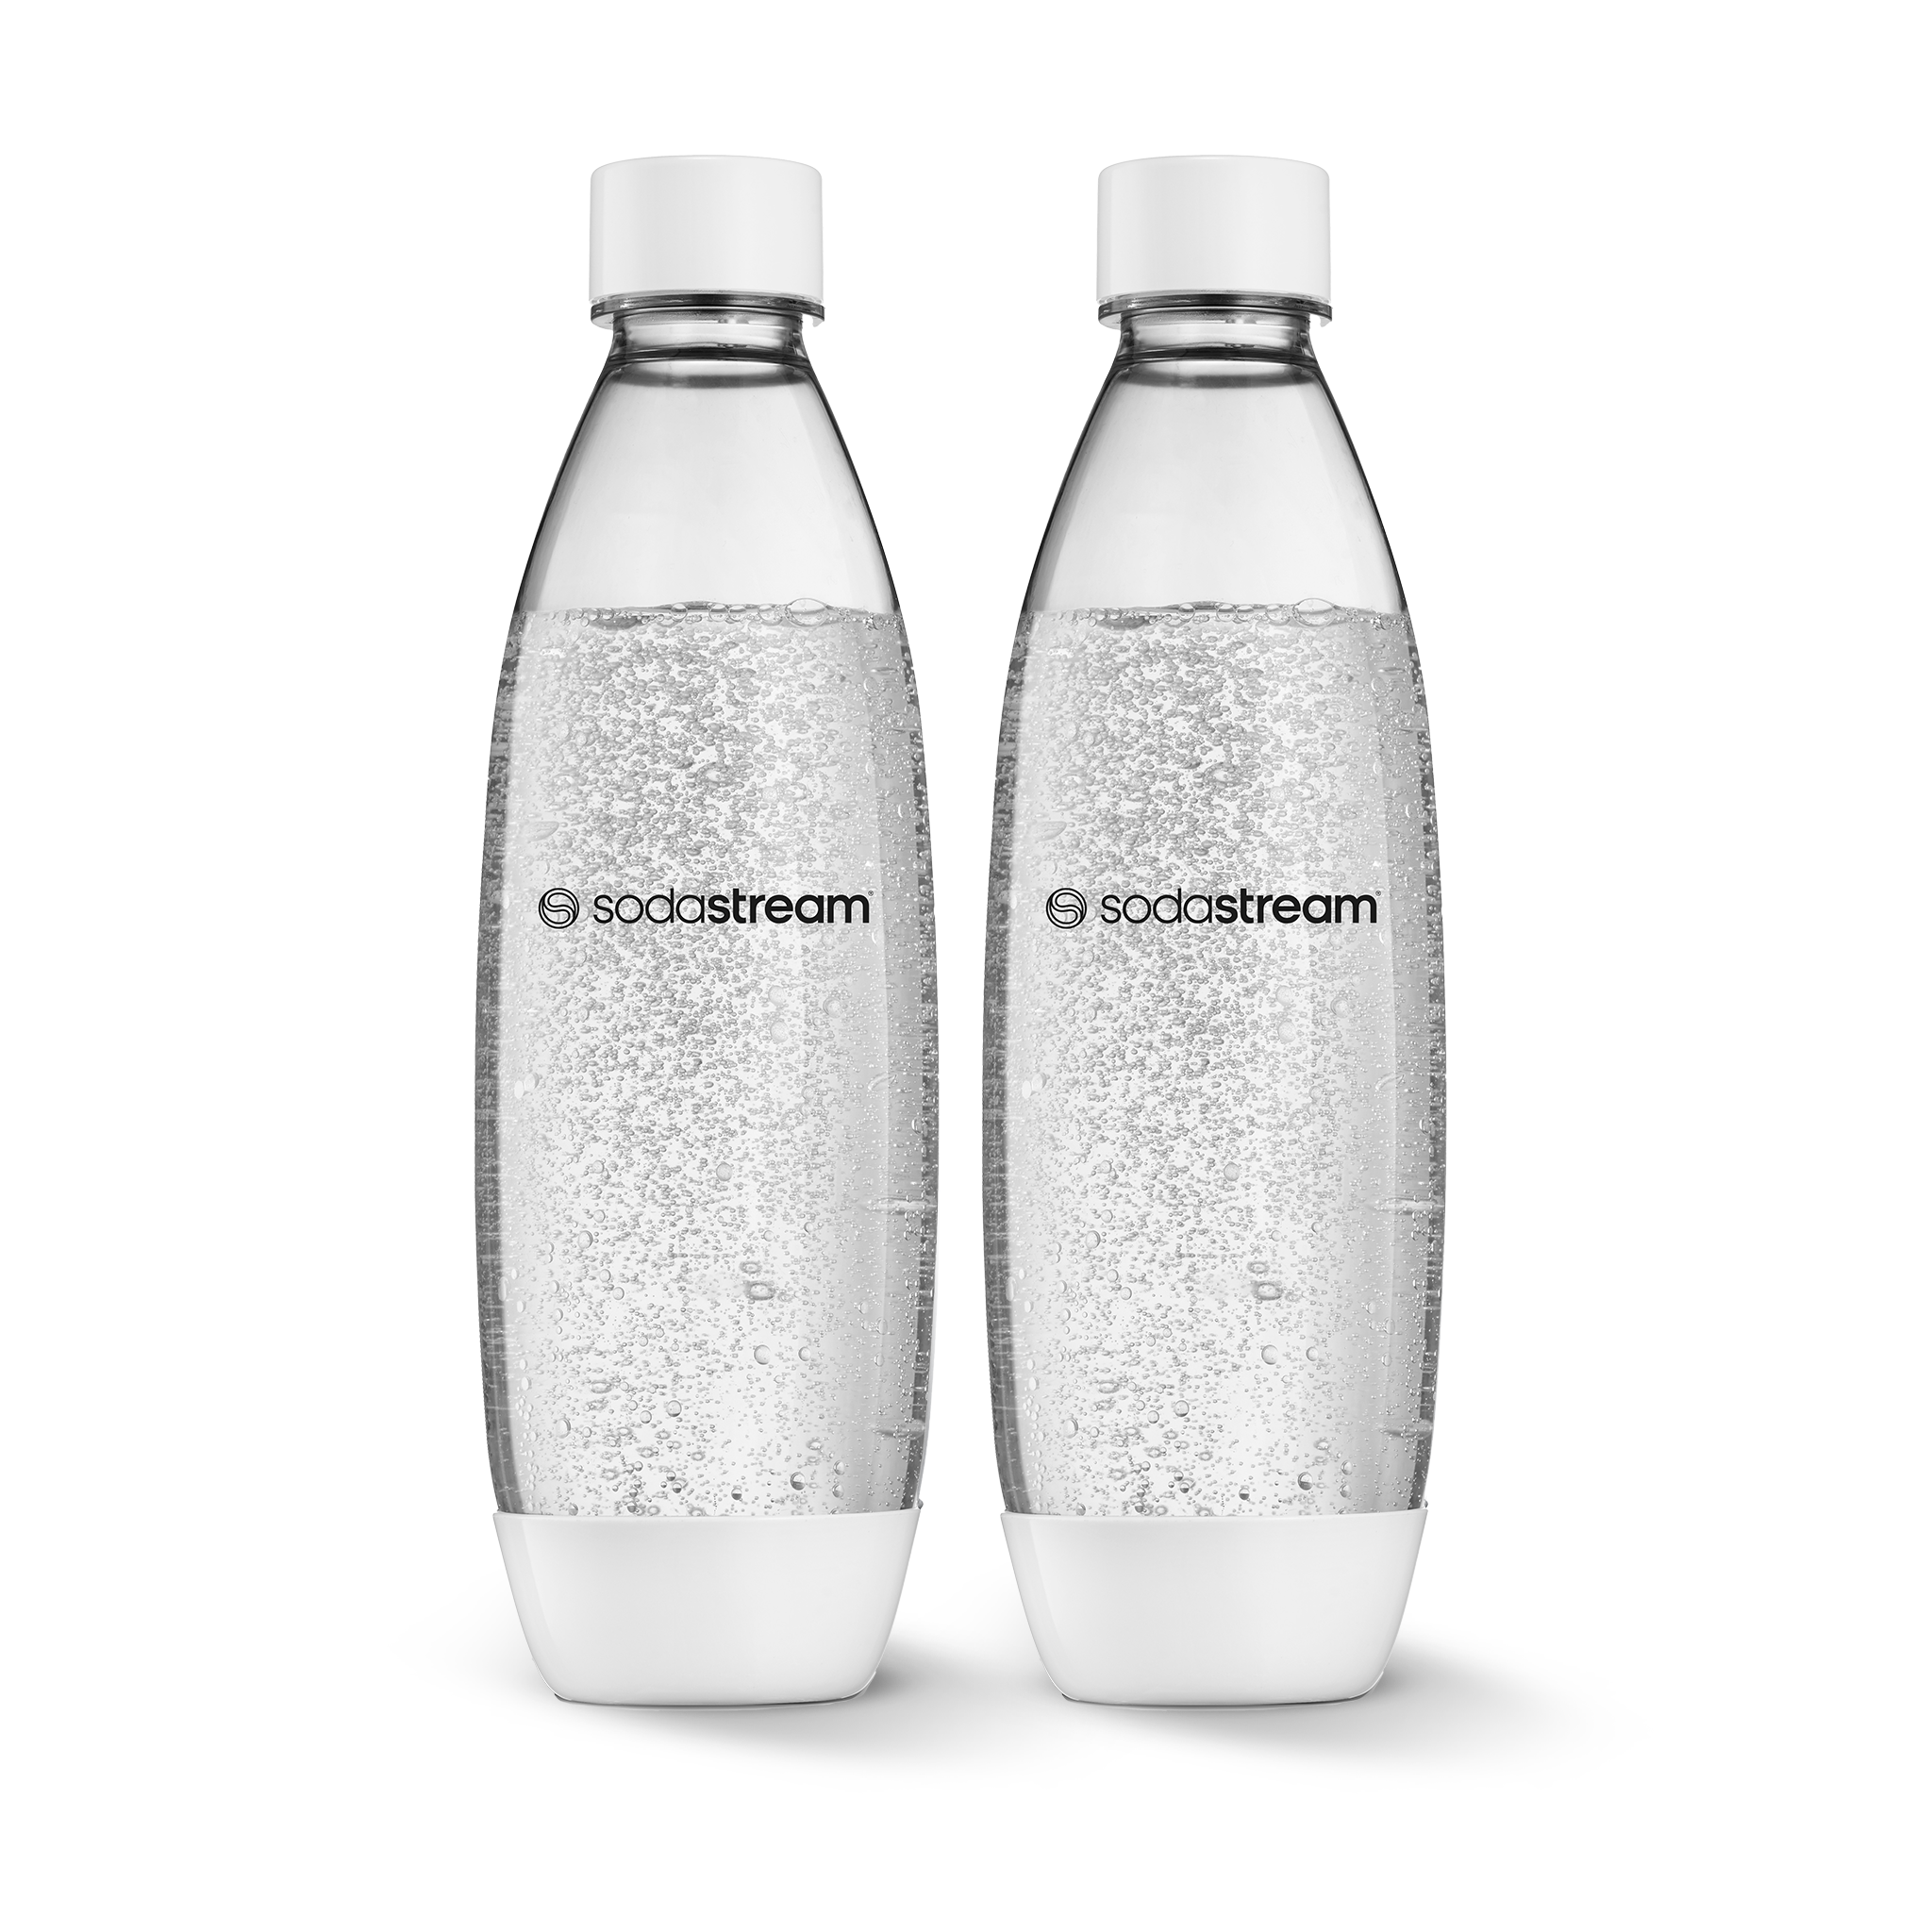 1L White Fuse Bottle, Twin Pack sodastream